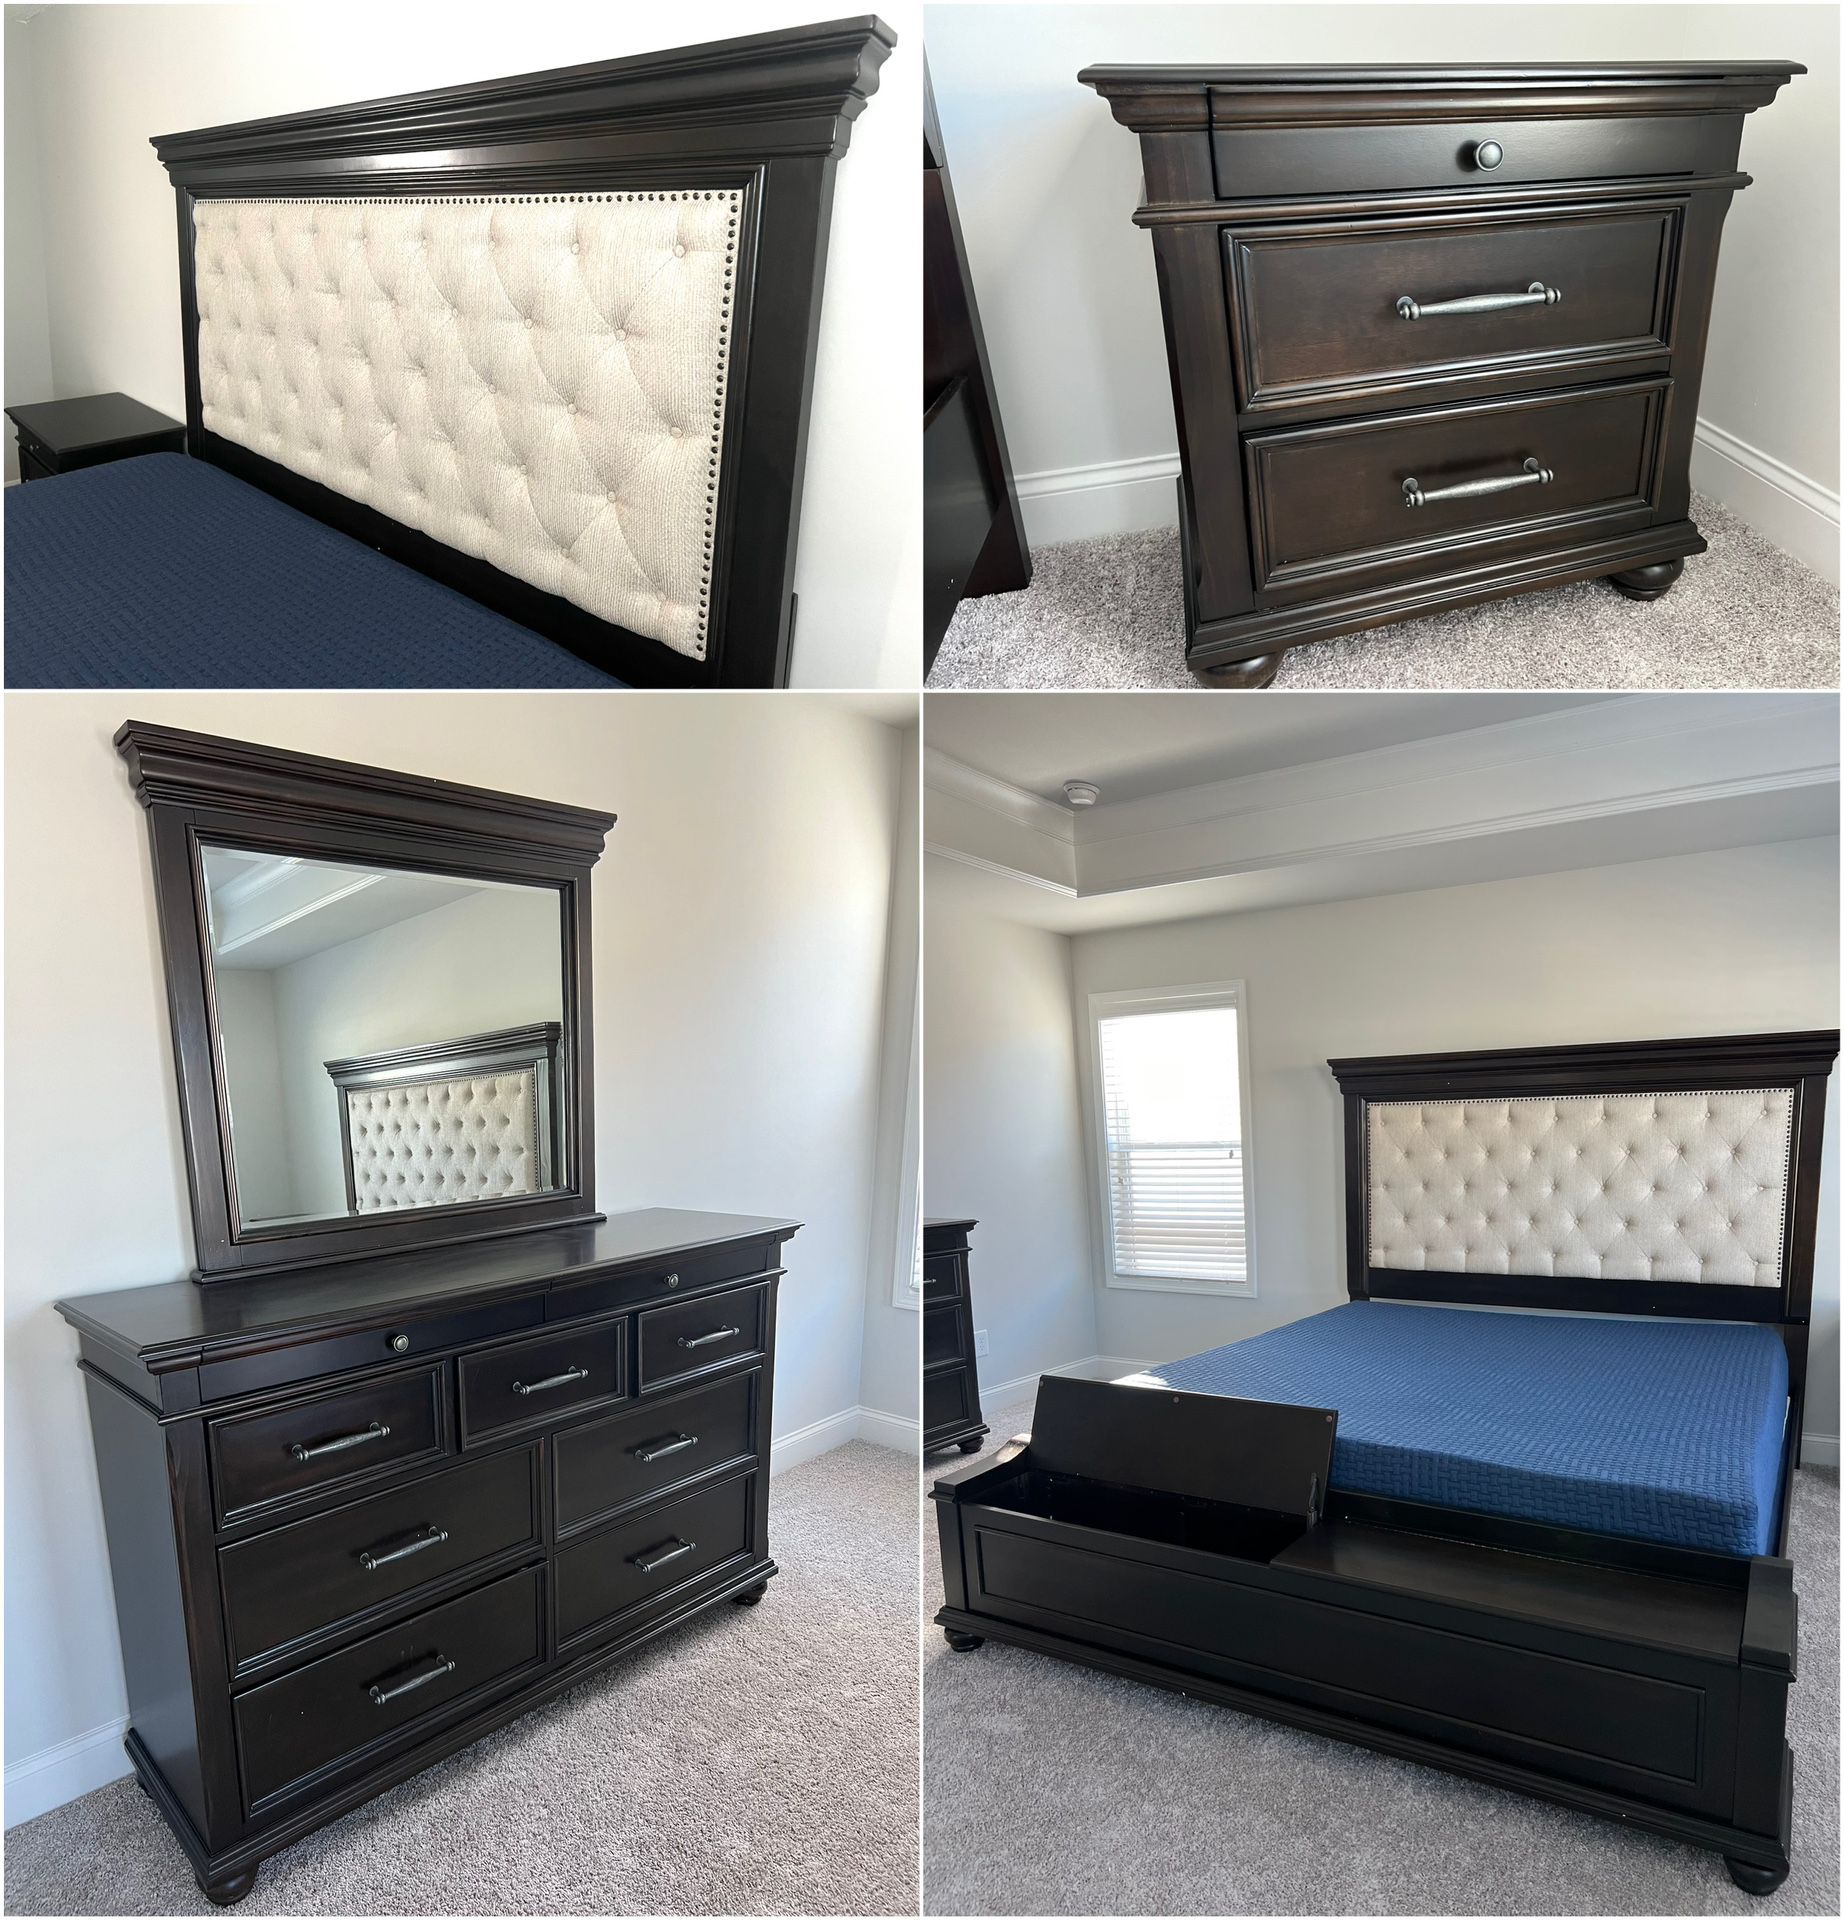 BRAND NEW SOLID STORAGE KING SIZE BEDROOM SET $1645! QUEEN SIZE $1545!..PRICE INCLUDES DELIVERY!!!